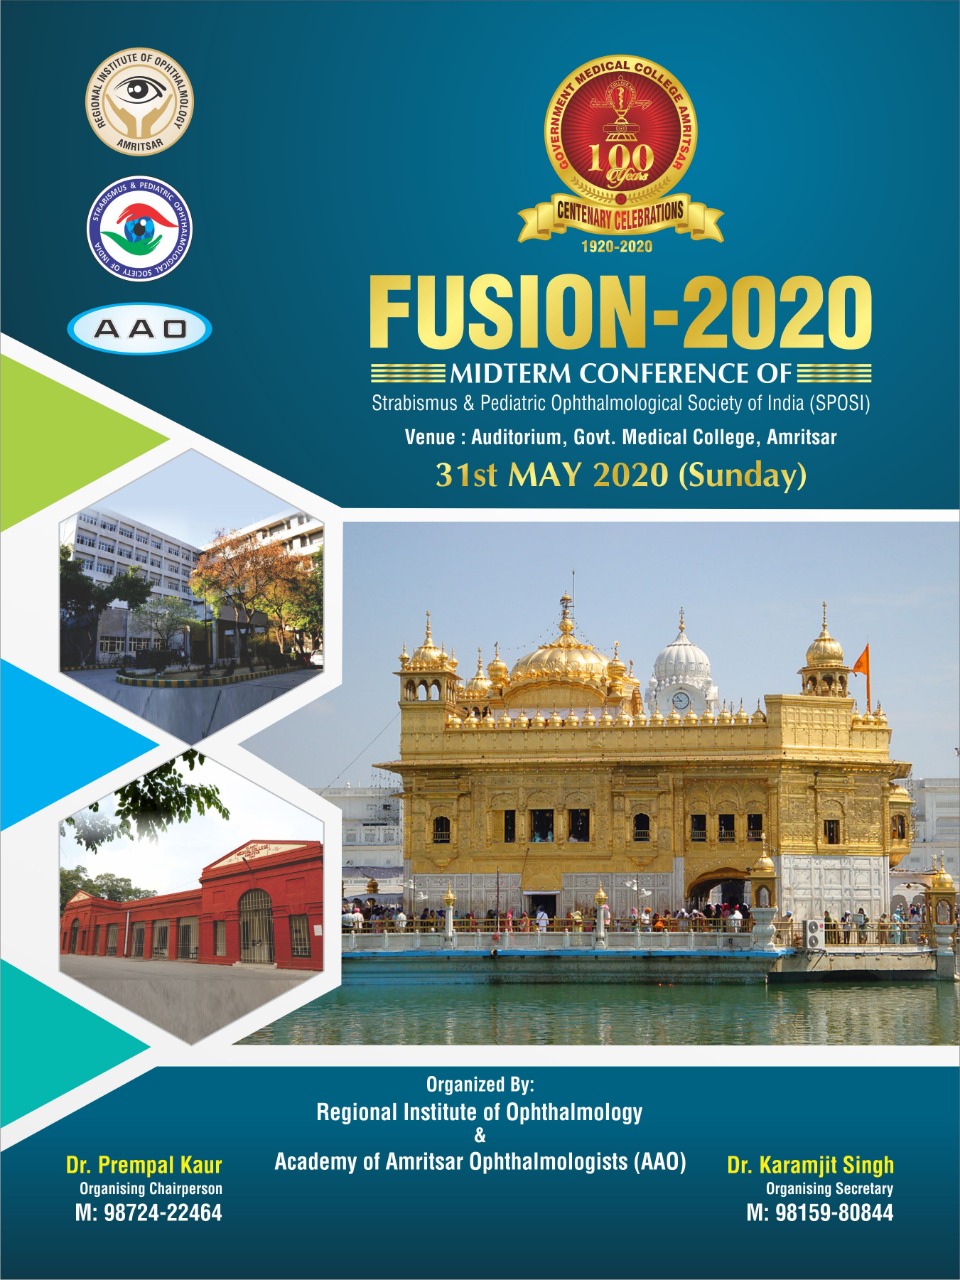  FUSION 2020 MIDTERM CONFERENCE